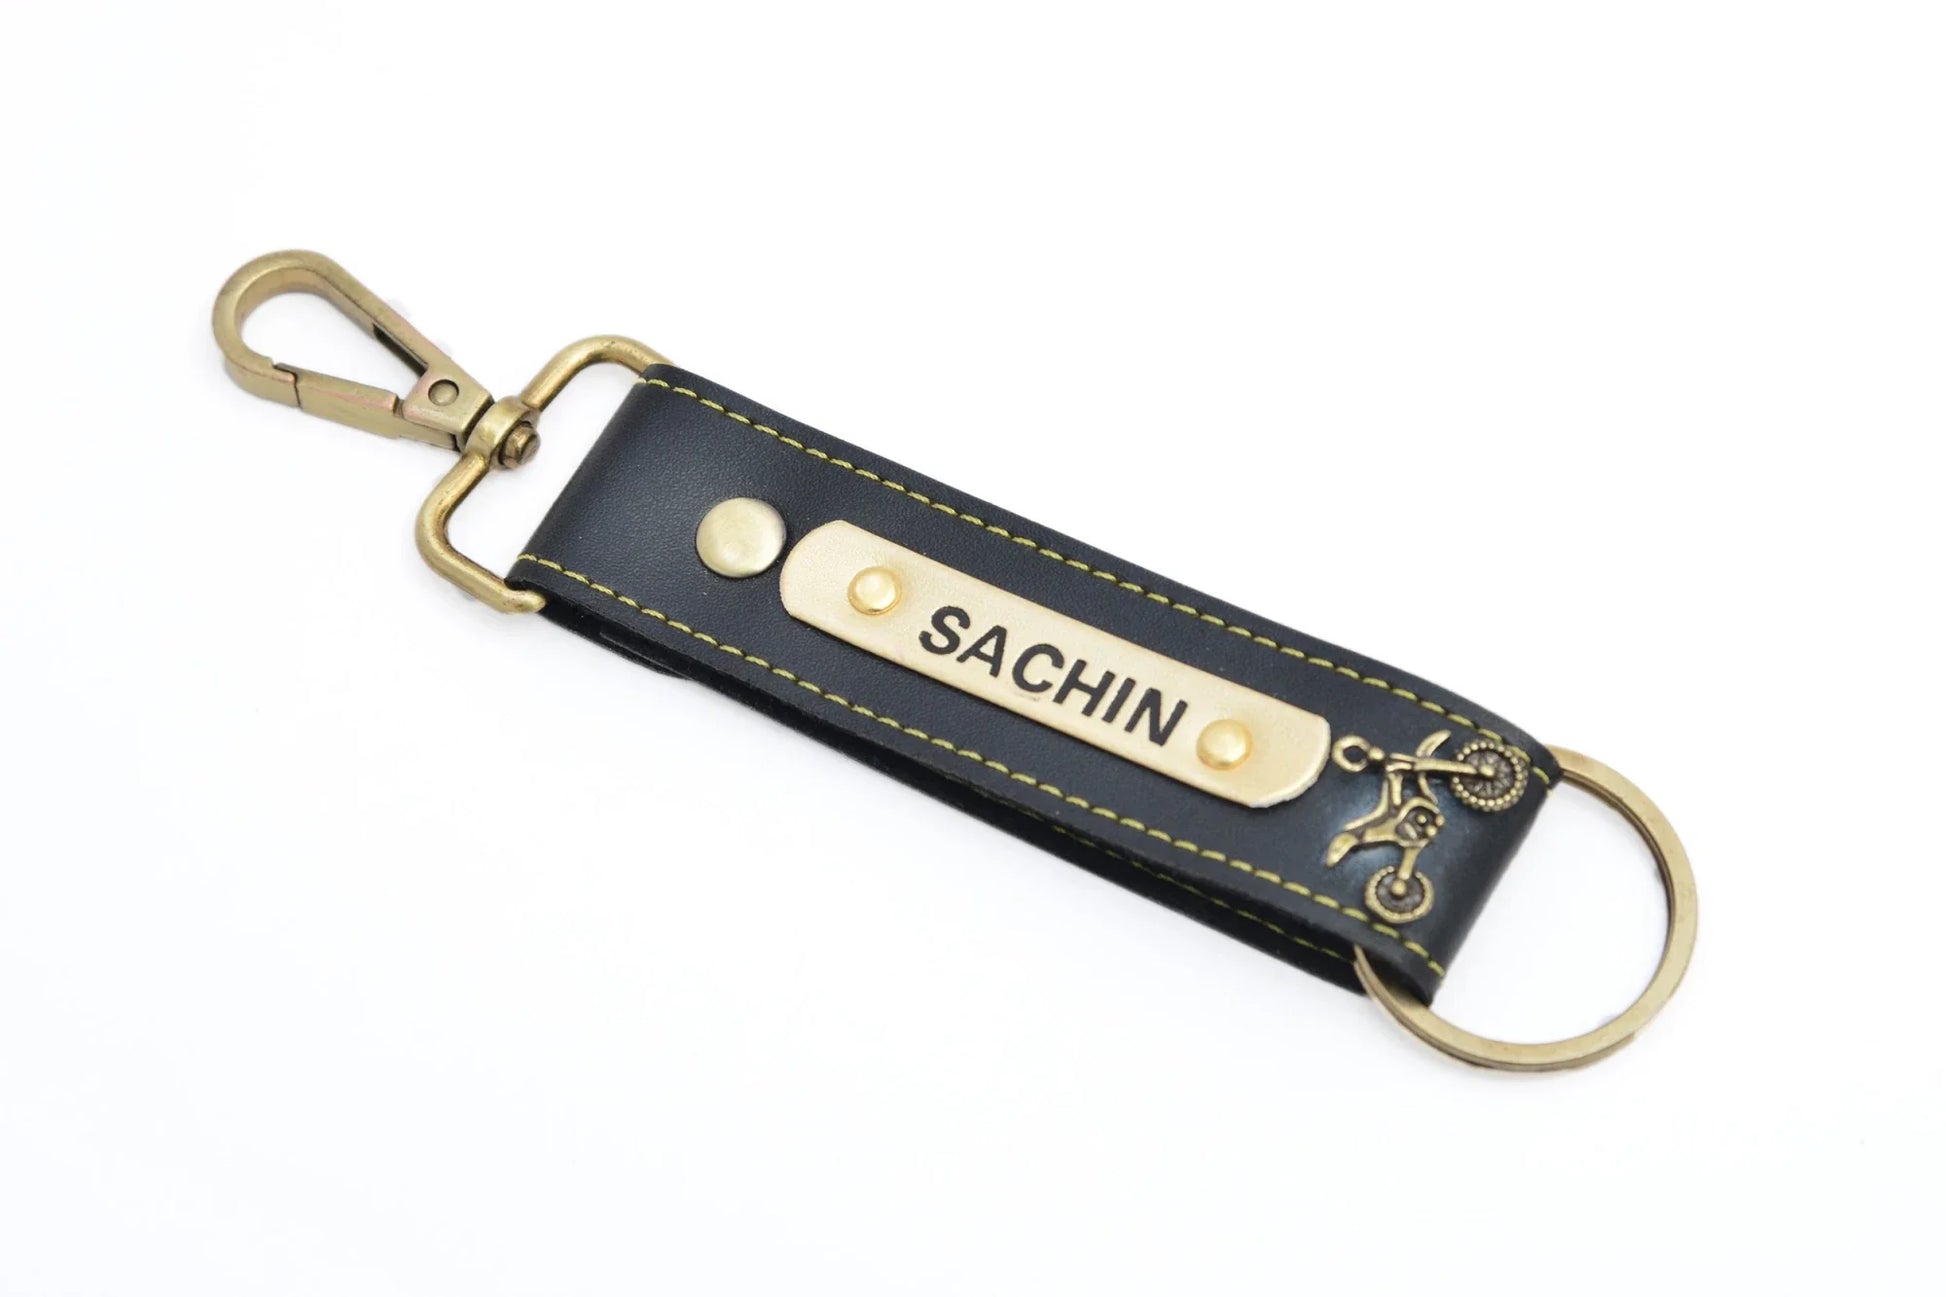 Avoid confusion with the help of these creative keychains of premium quality leather and customization